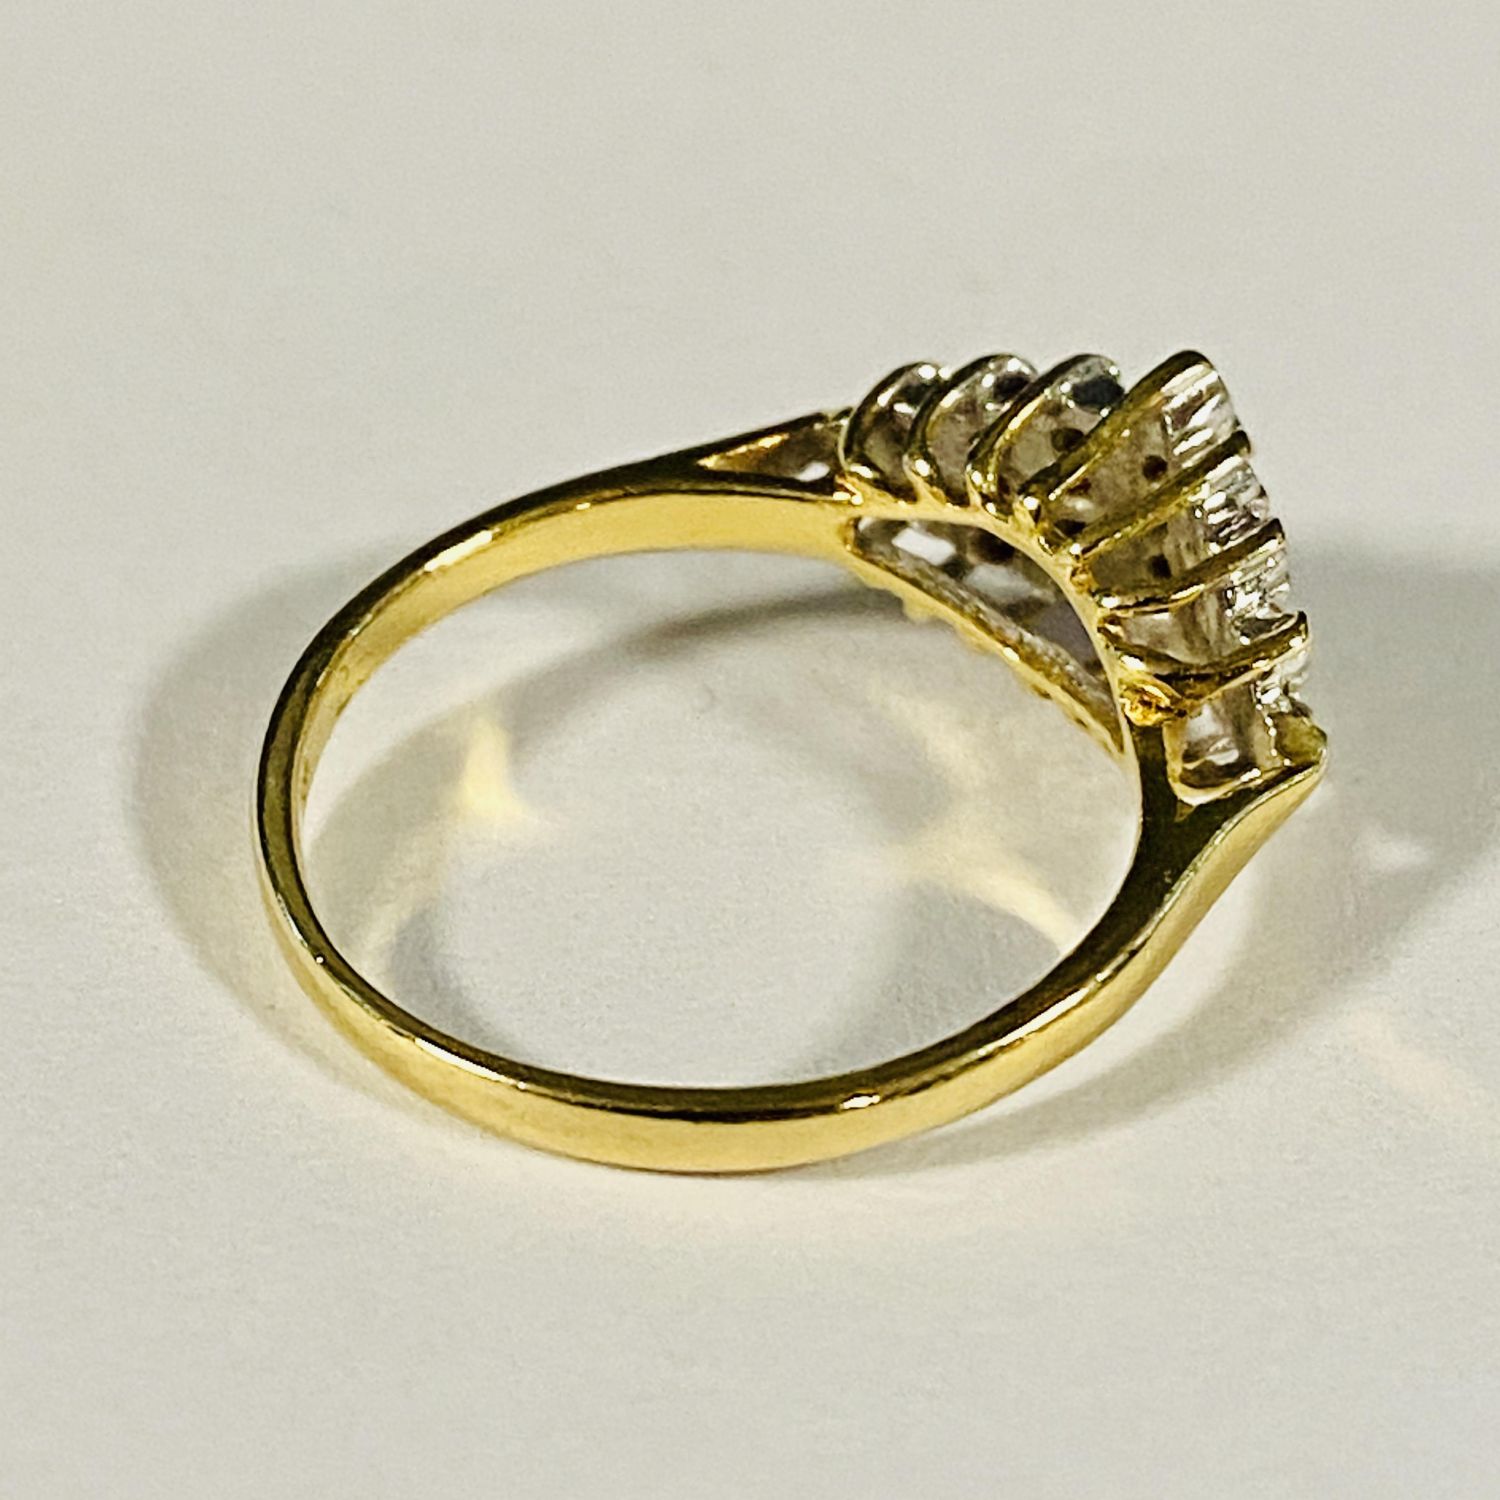 18ct Gold Diamond Cluster Ring - Jewellery & Gold - Hemswell Antique ...